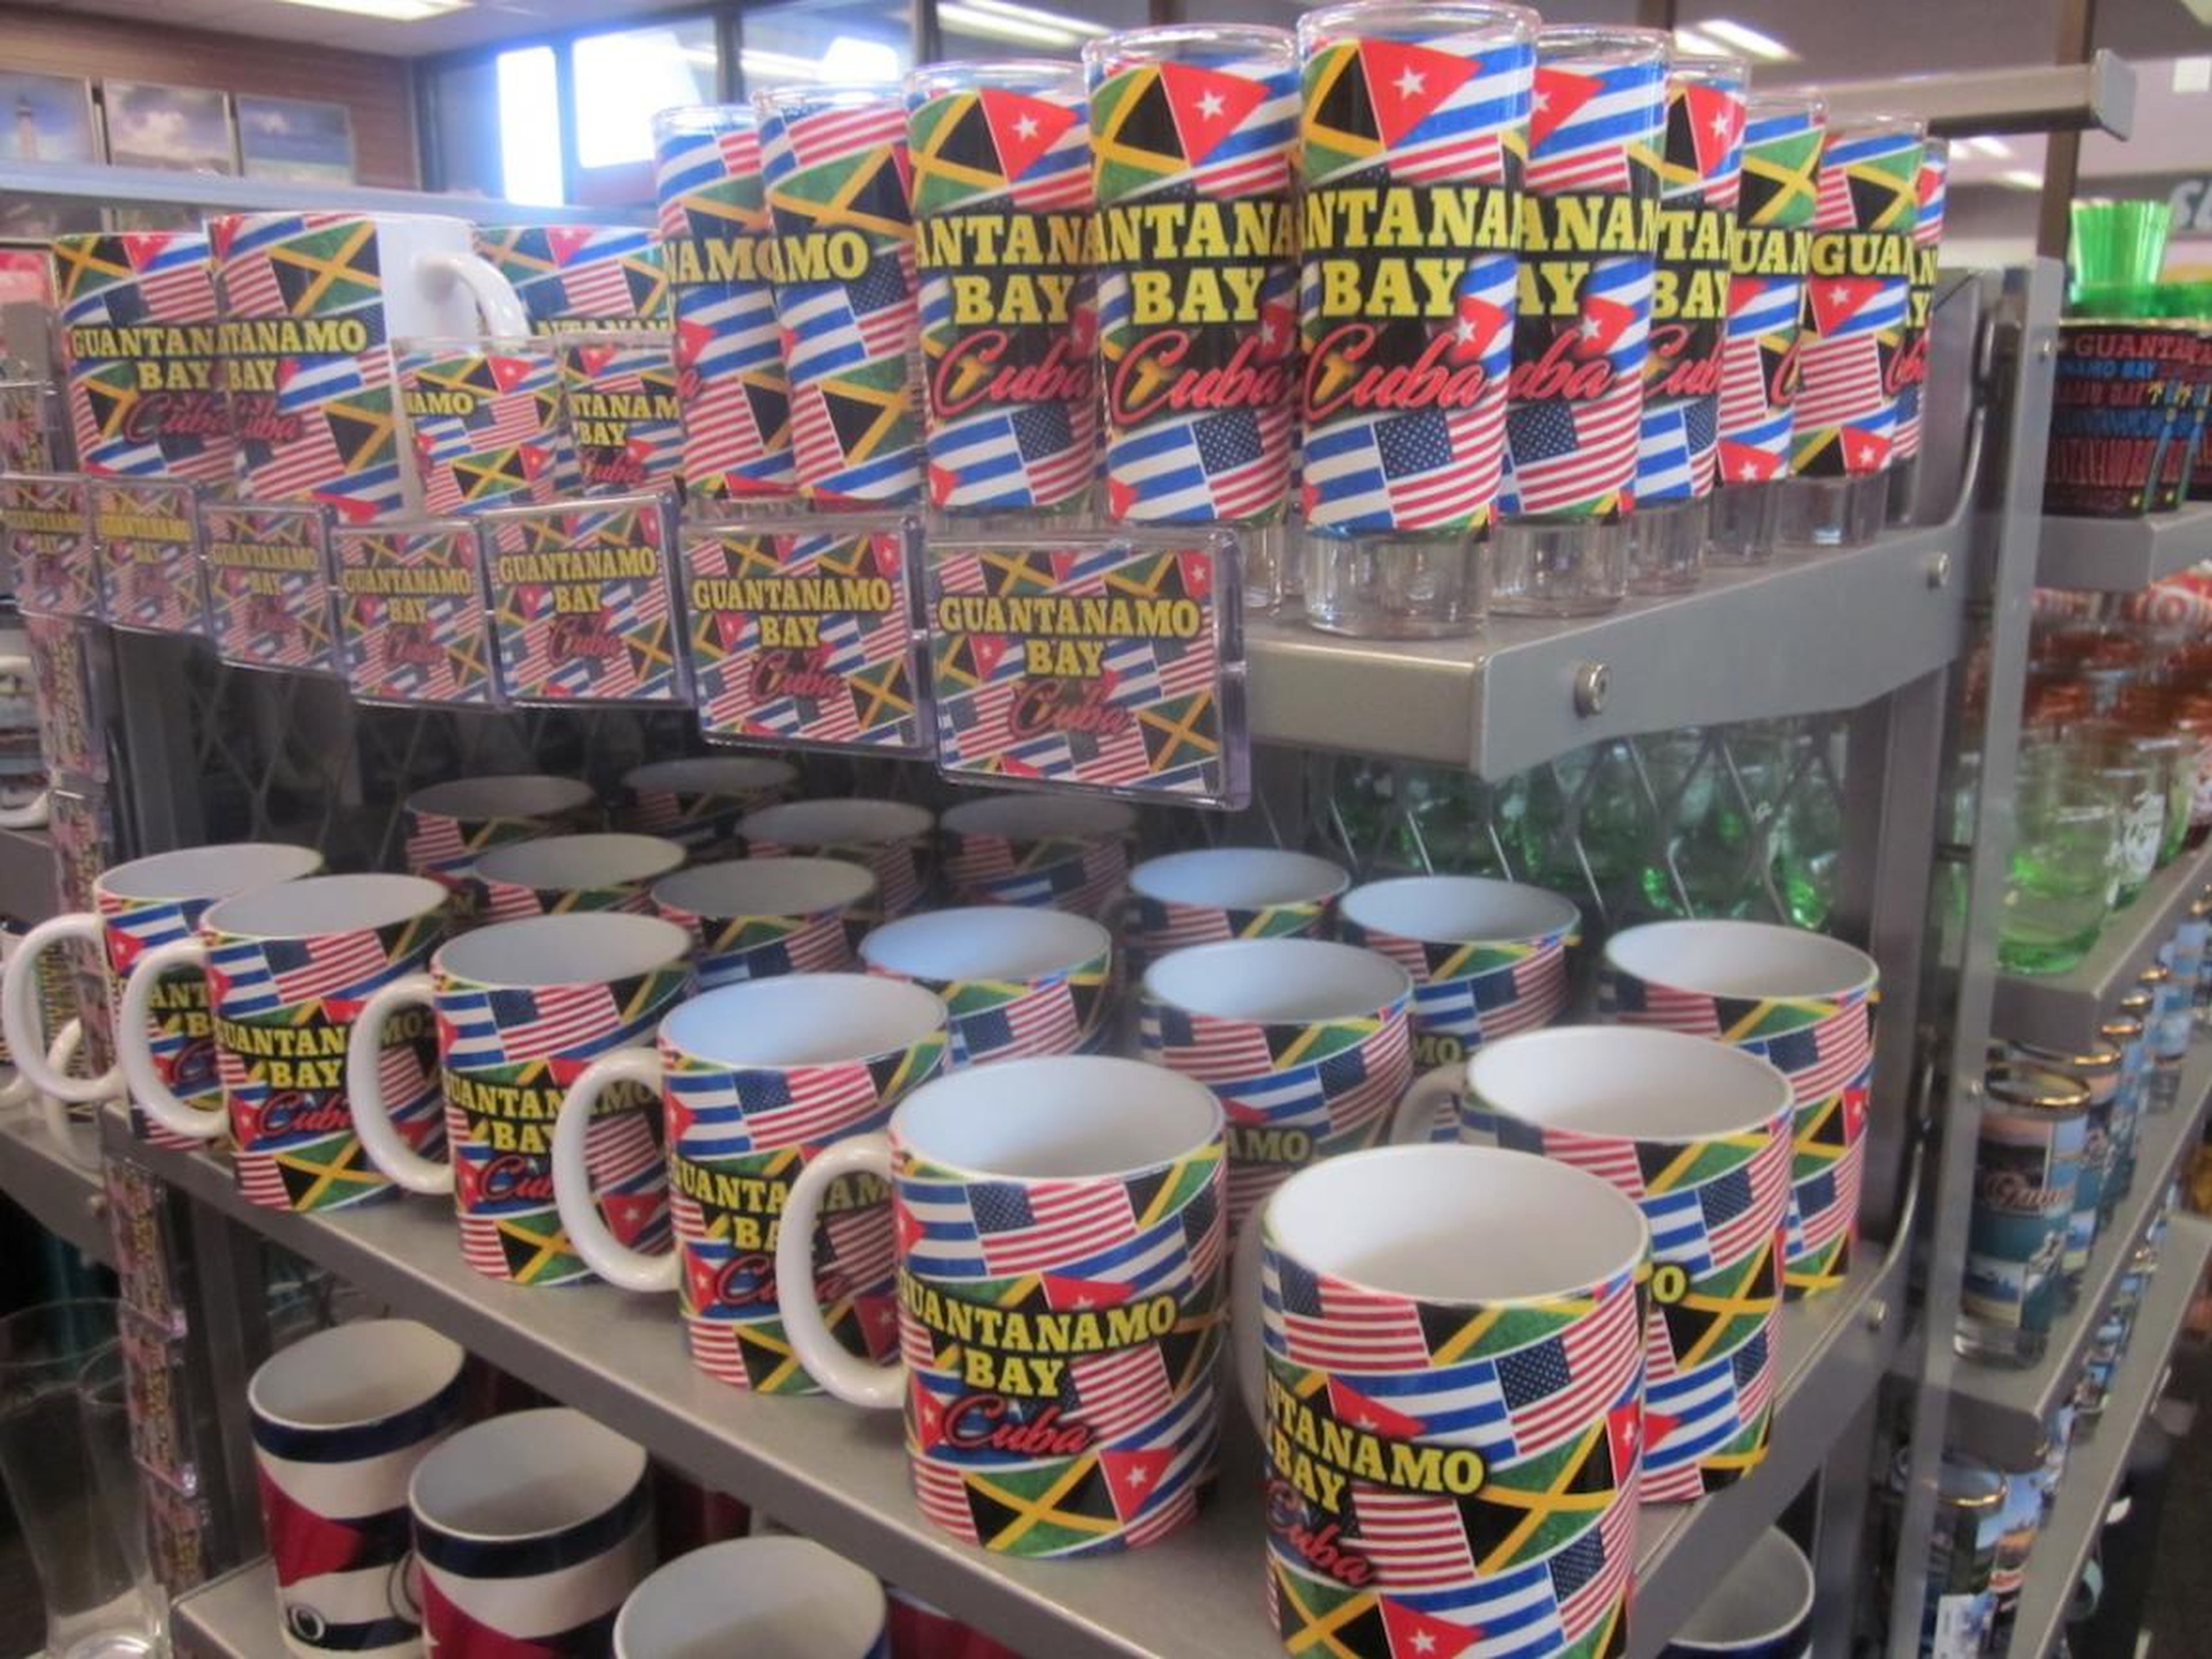 Some other mugs have the flags of the US, Cuba, and Jamaica on them — likely representing the countries whose citizens live on the base.